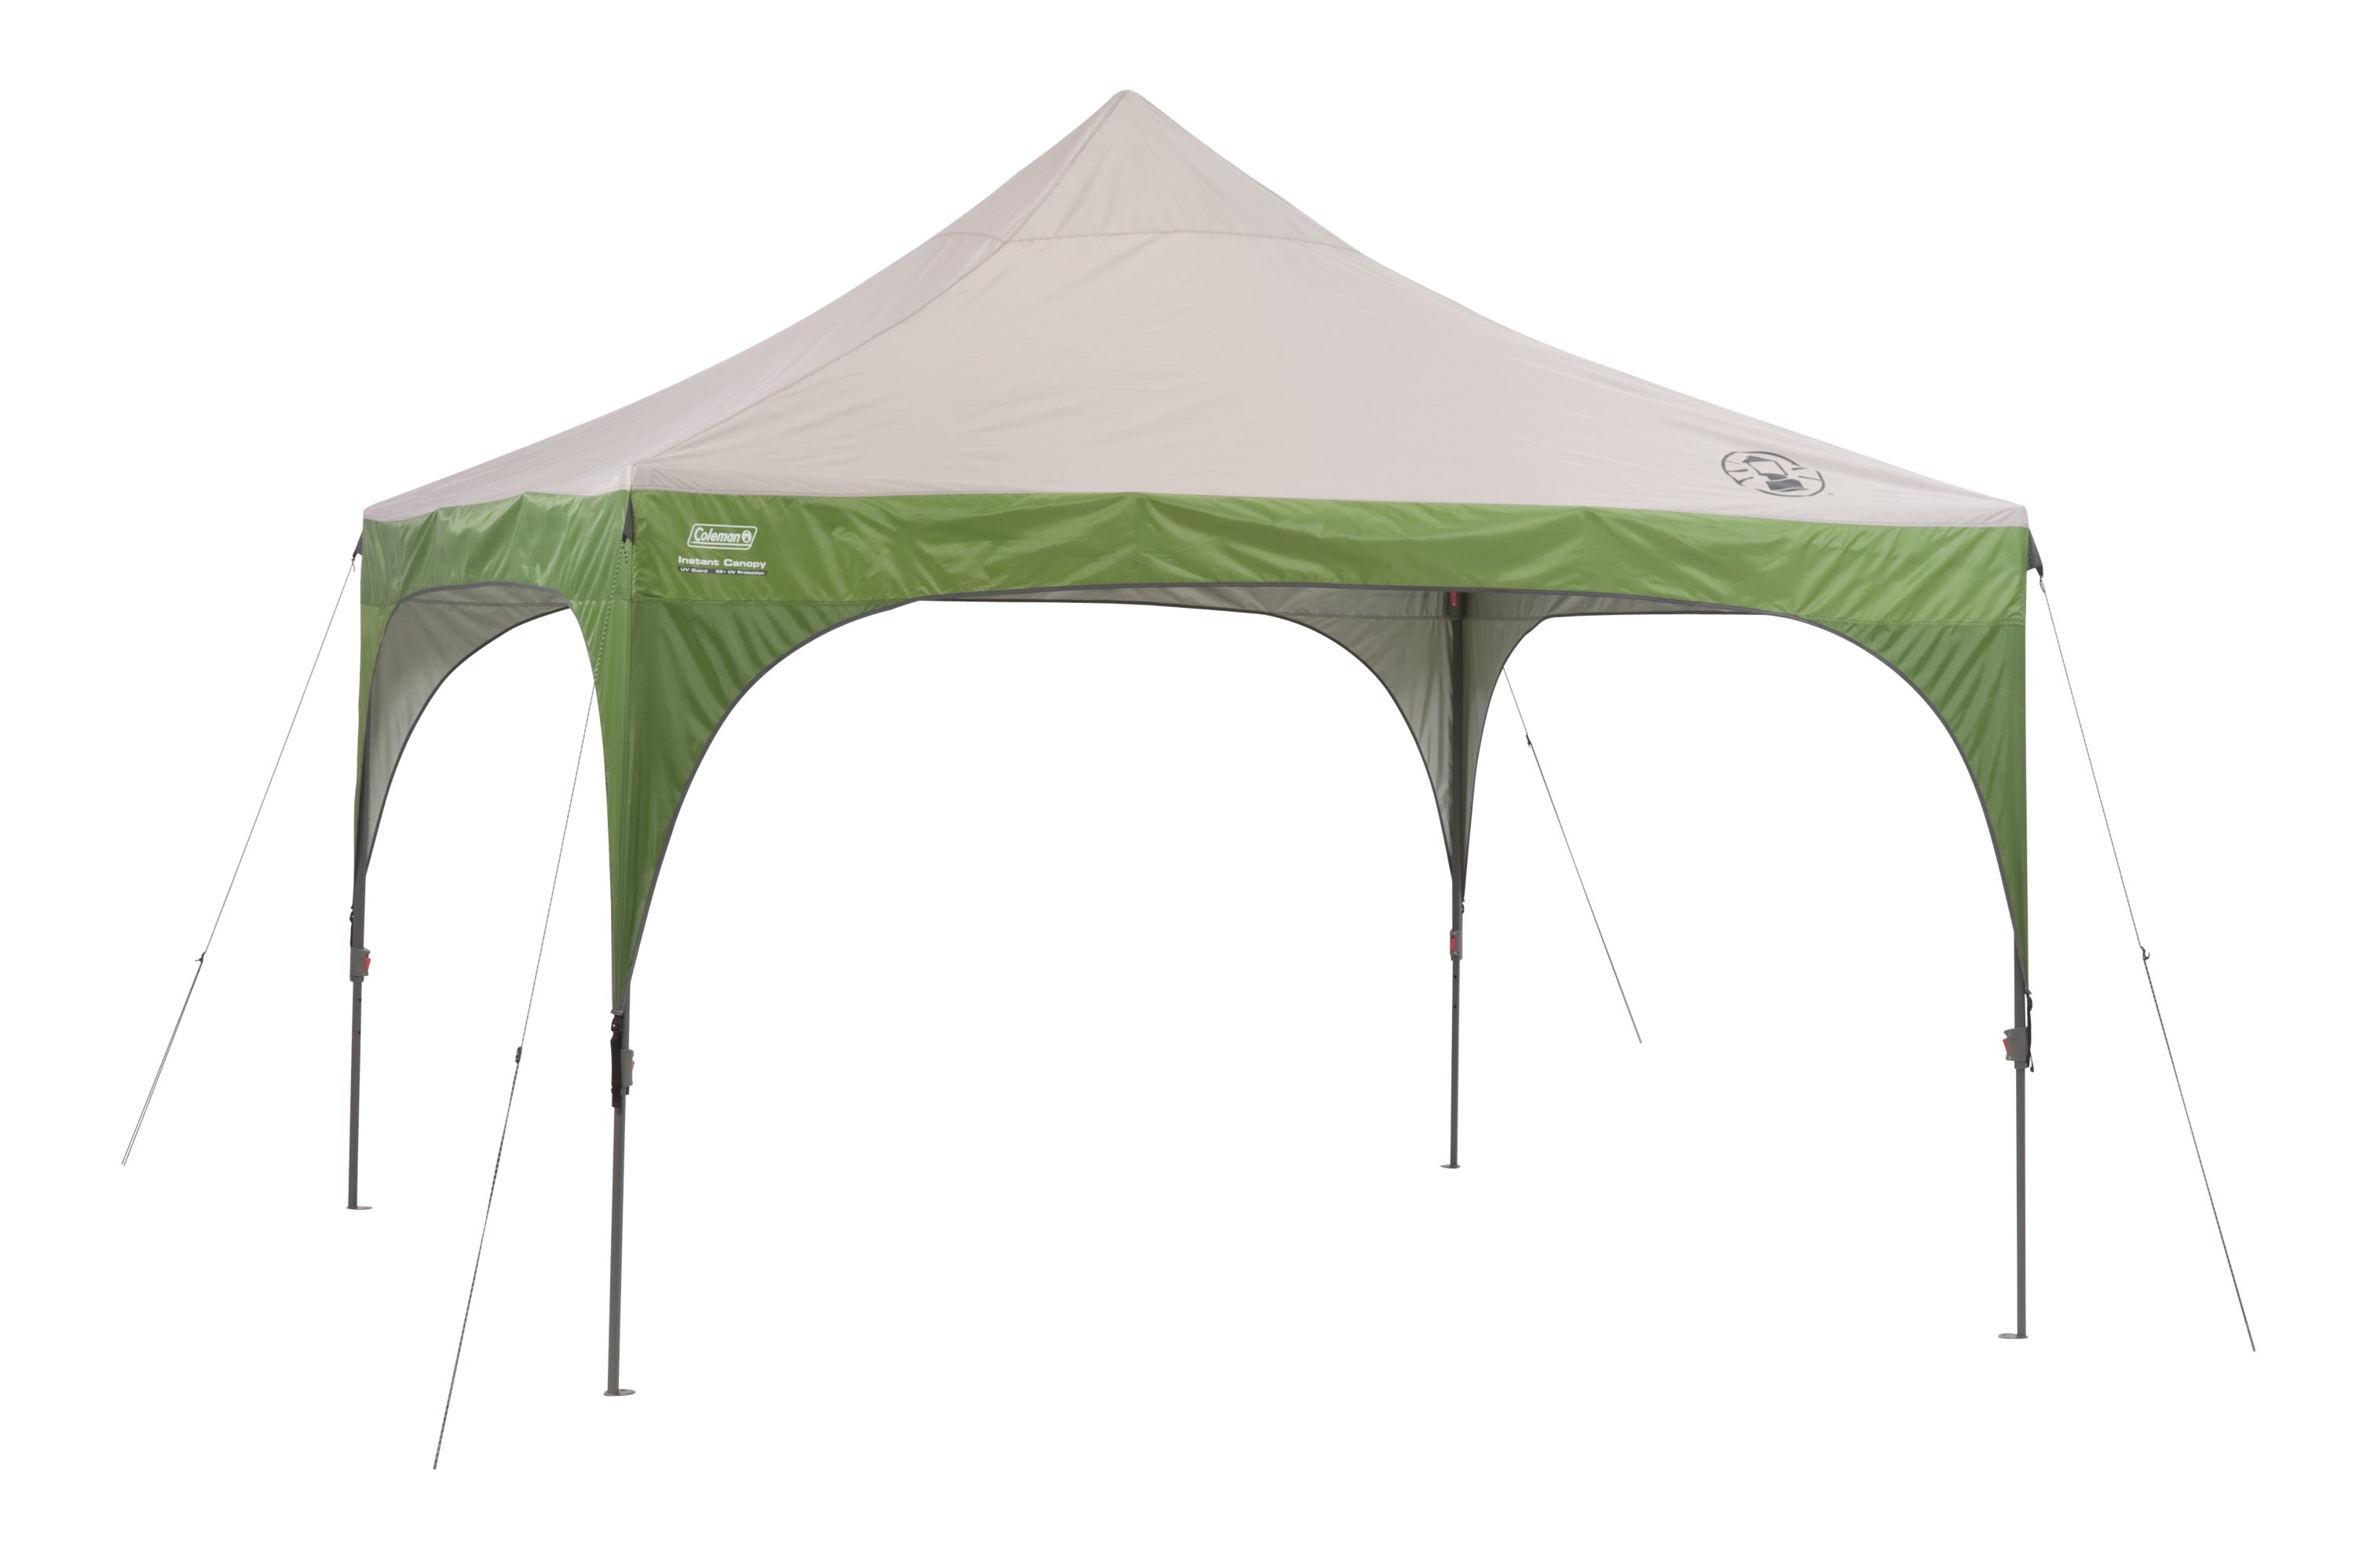 omroeper Tijdreeksen Charlotte Bronte 12 x 12 Canopy Sun Shelter with Instant Setup | Coleman